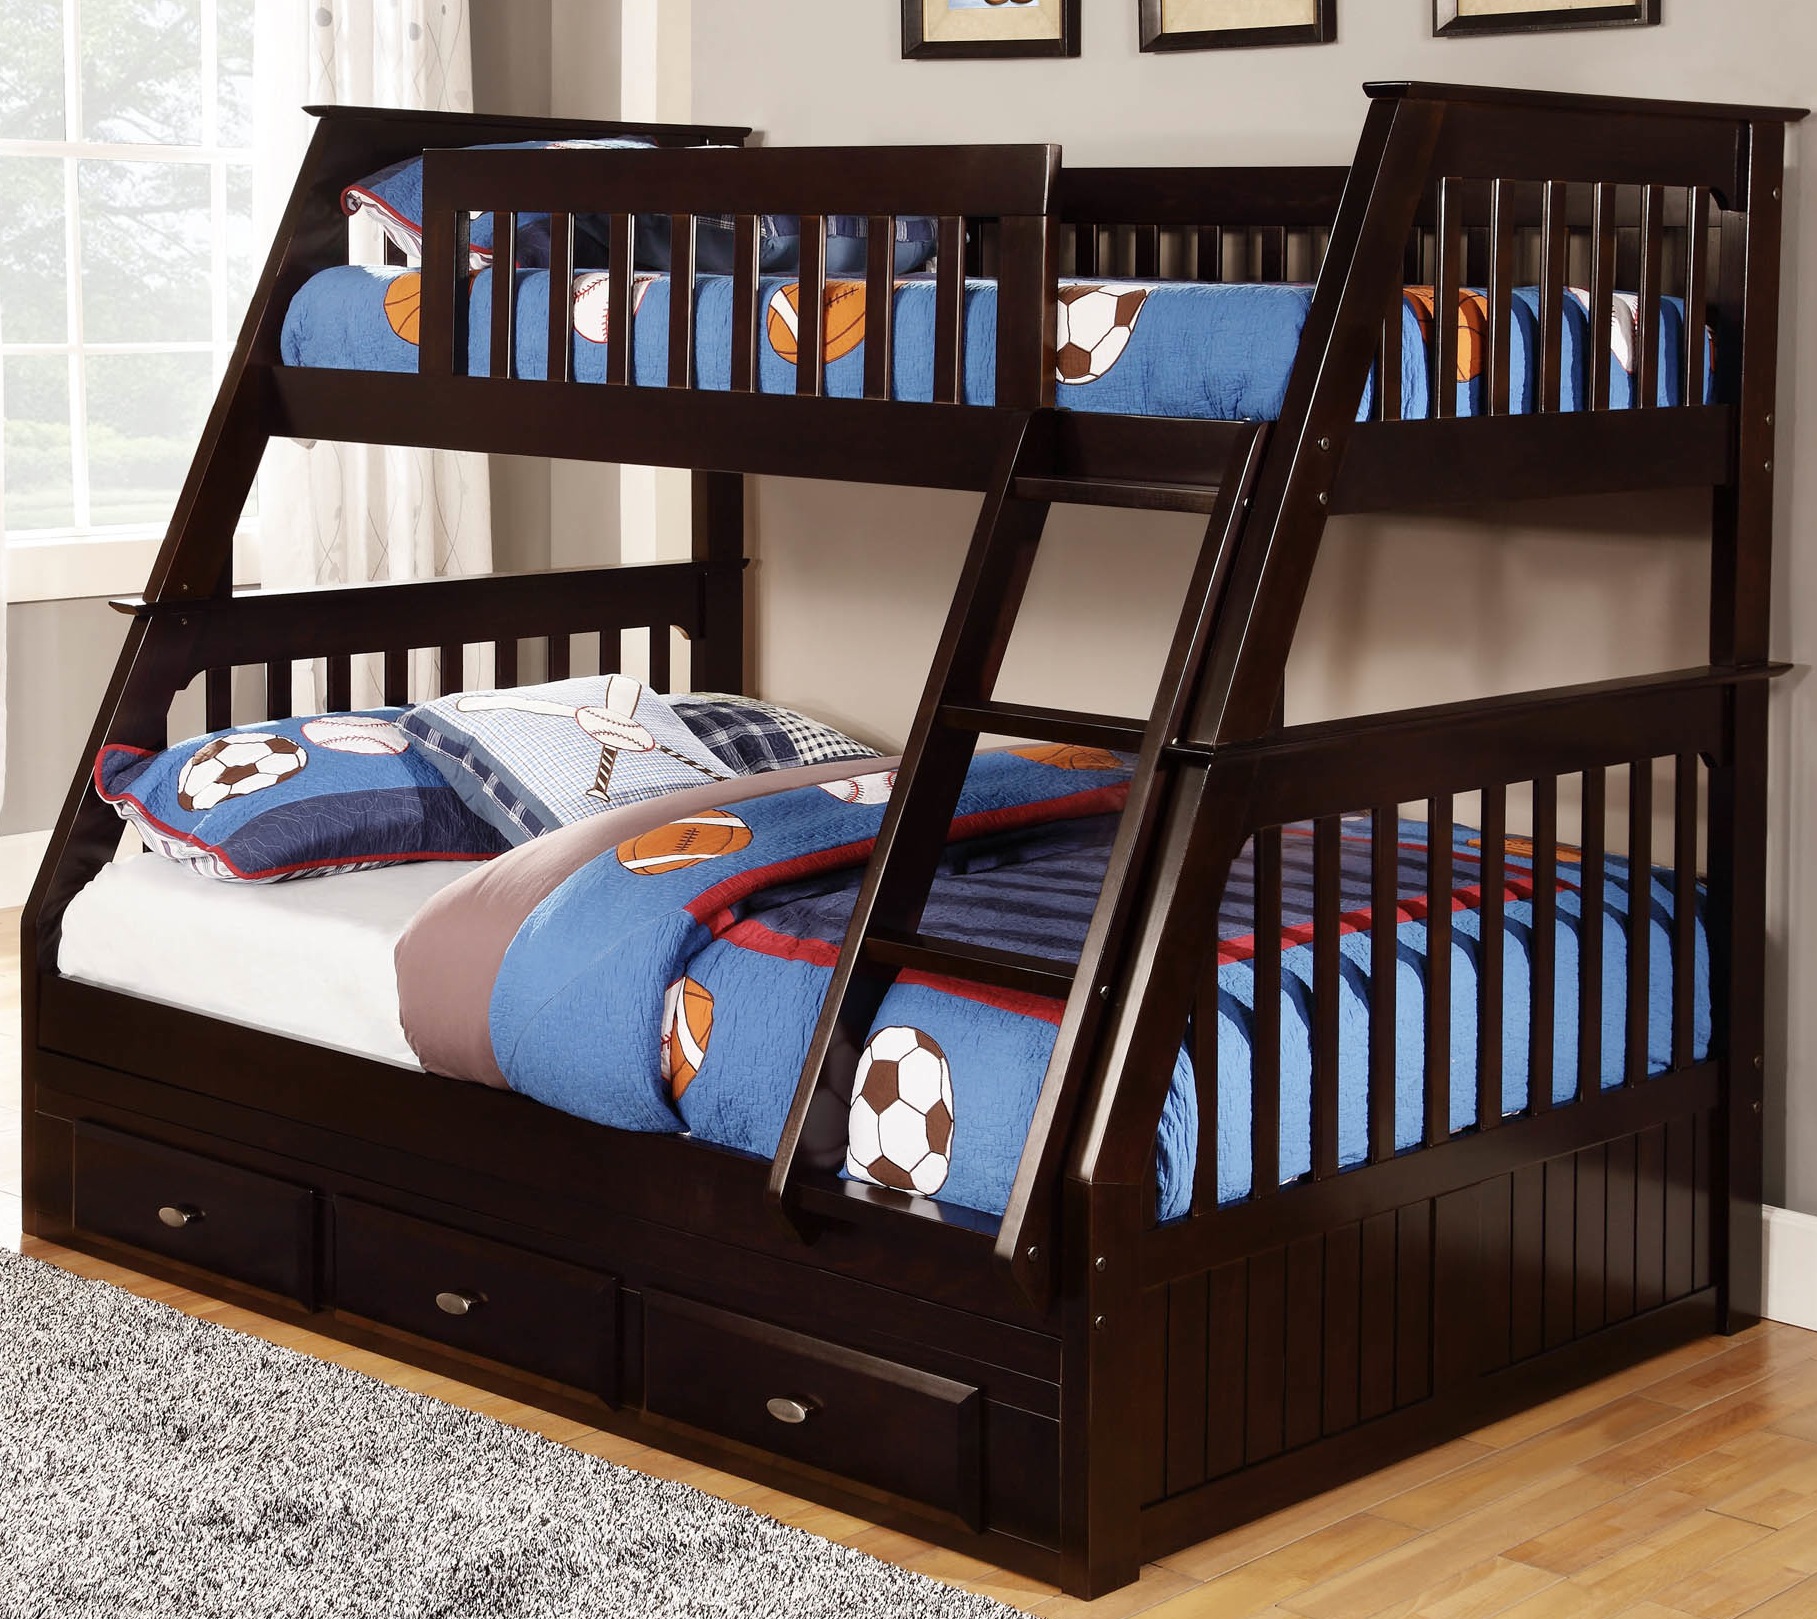 Espresso Mission Bunk Bed Kfs S, All Modern Twin Over Full Bunk Bed